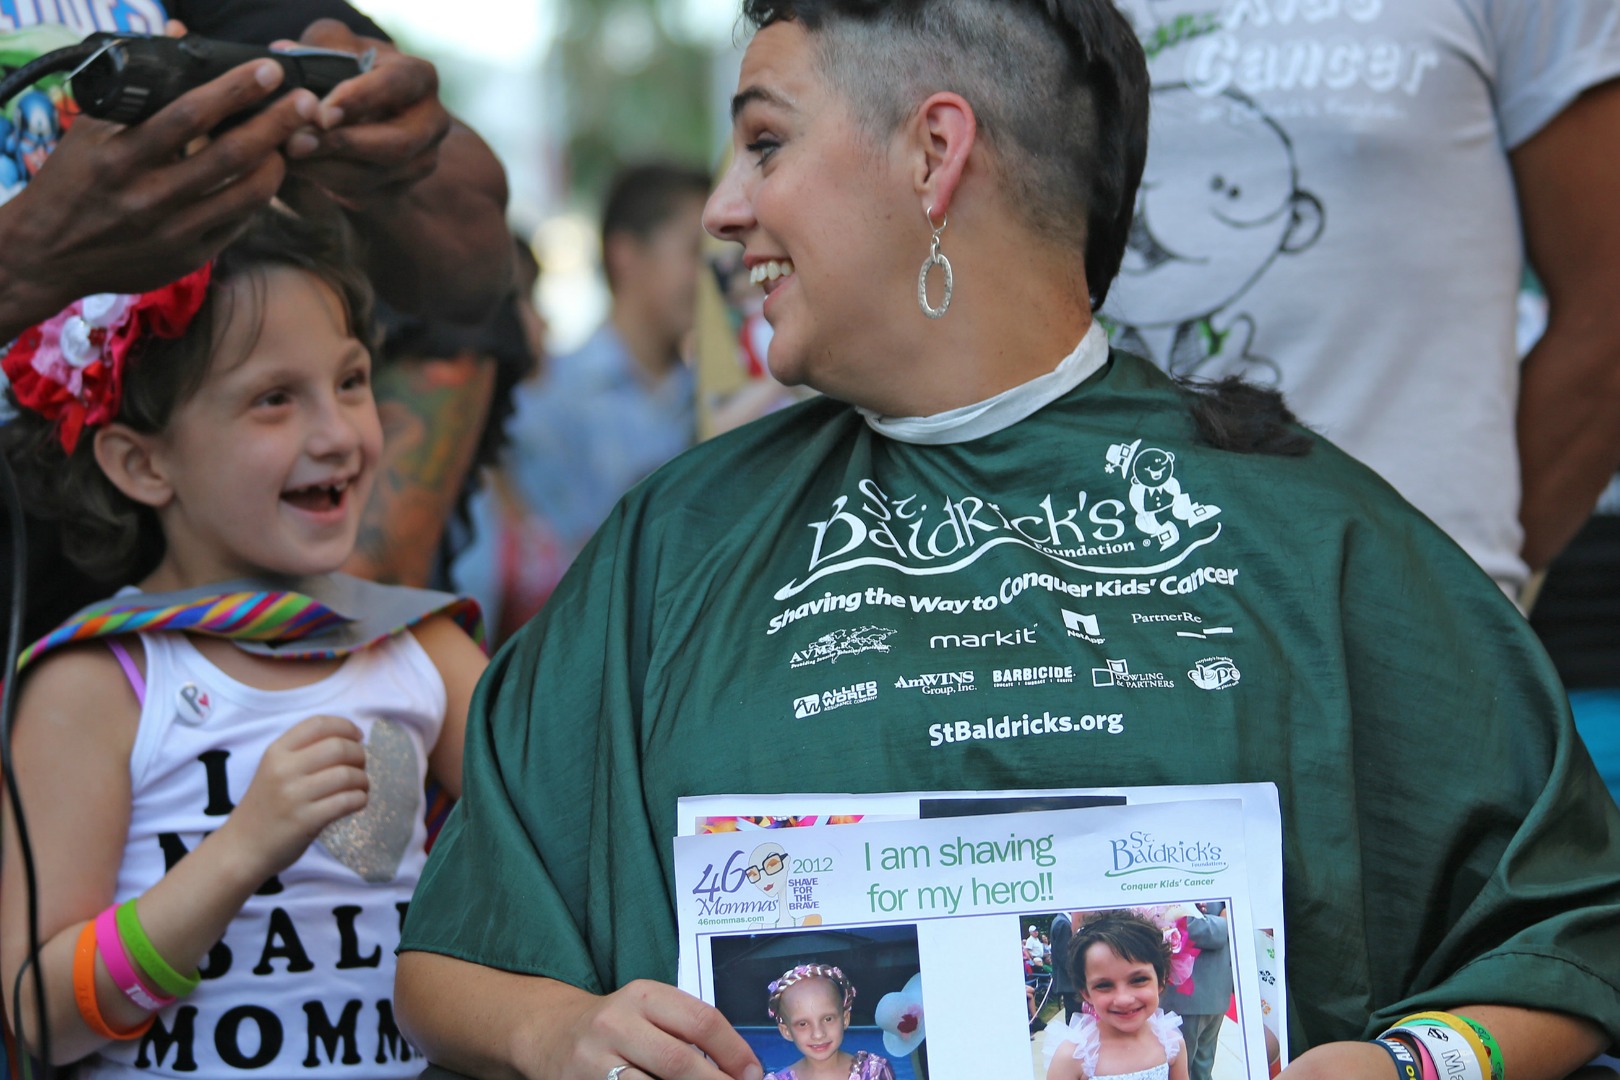 46-Mommas-mother-and-daughter-childhood-cancer-head-shaving